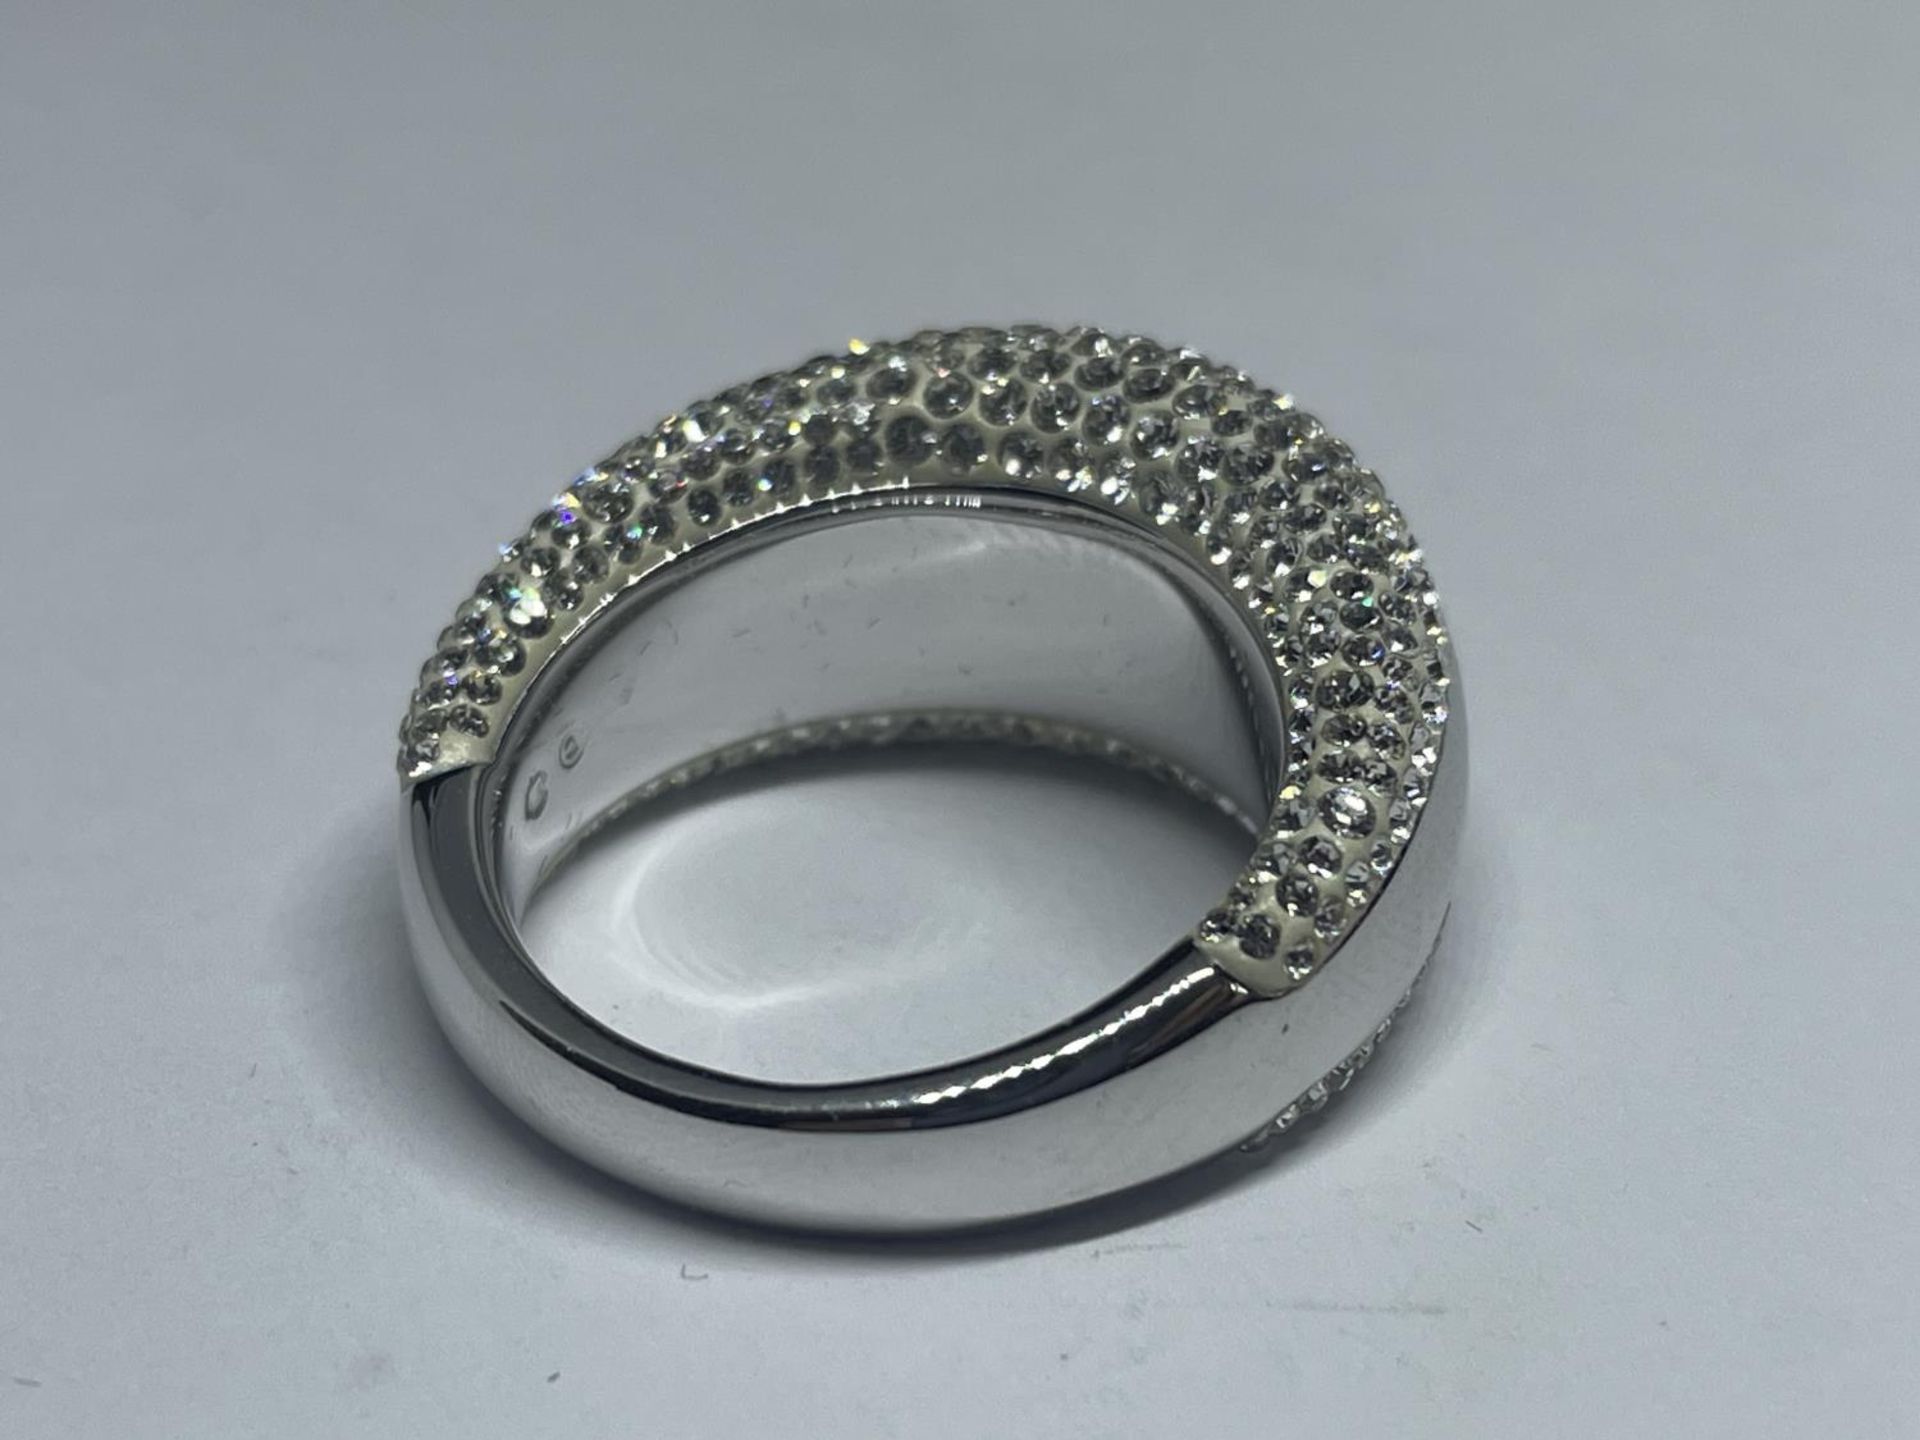 A SWAROVSKI CRYSTAL RING WITH LABEL IN A PRESENTATION BOX WITH SLEEVE SIZE R - Image 2 of 4